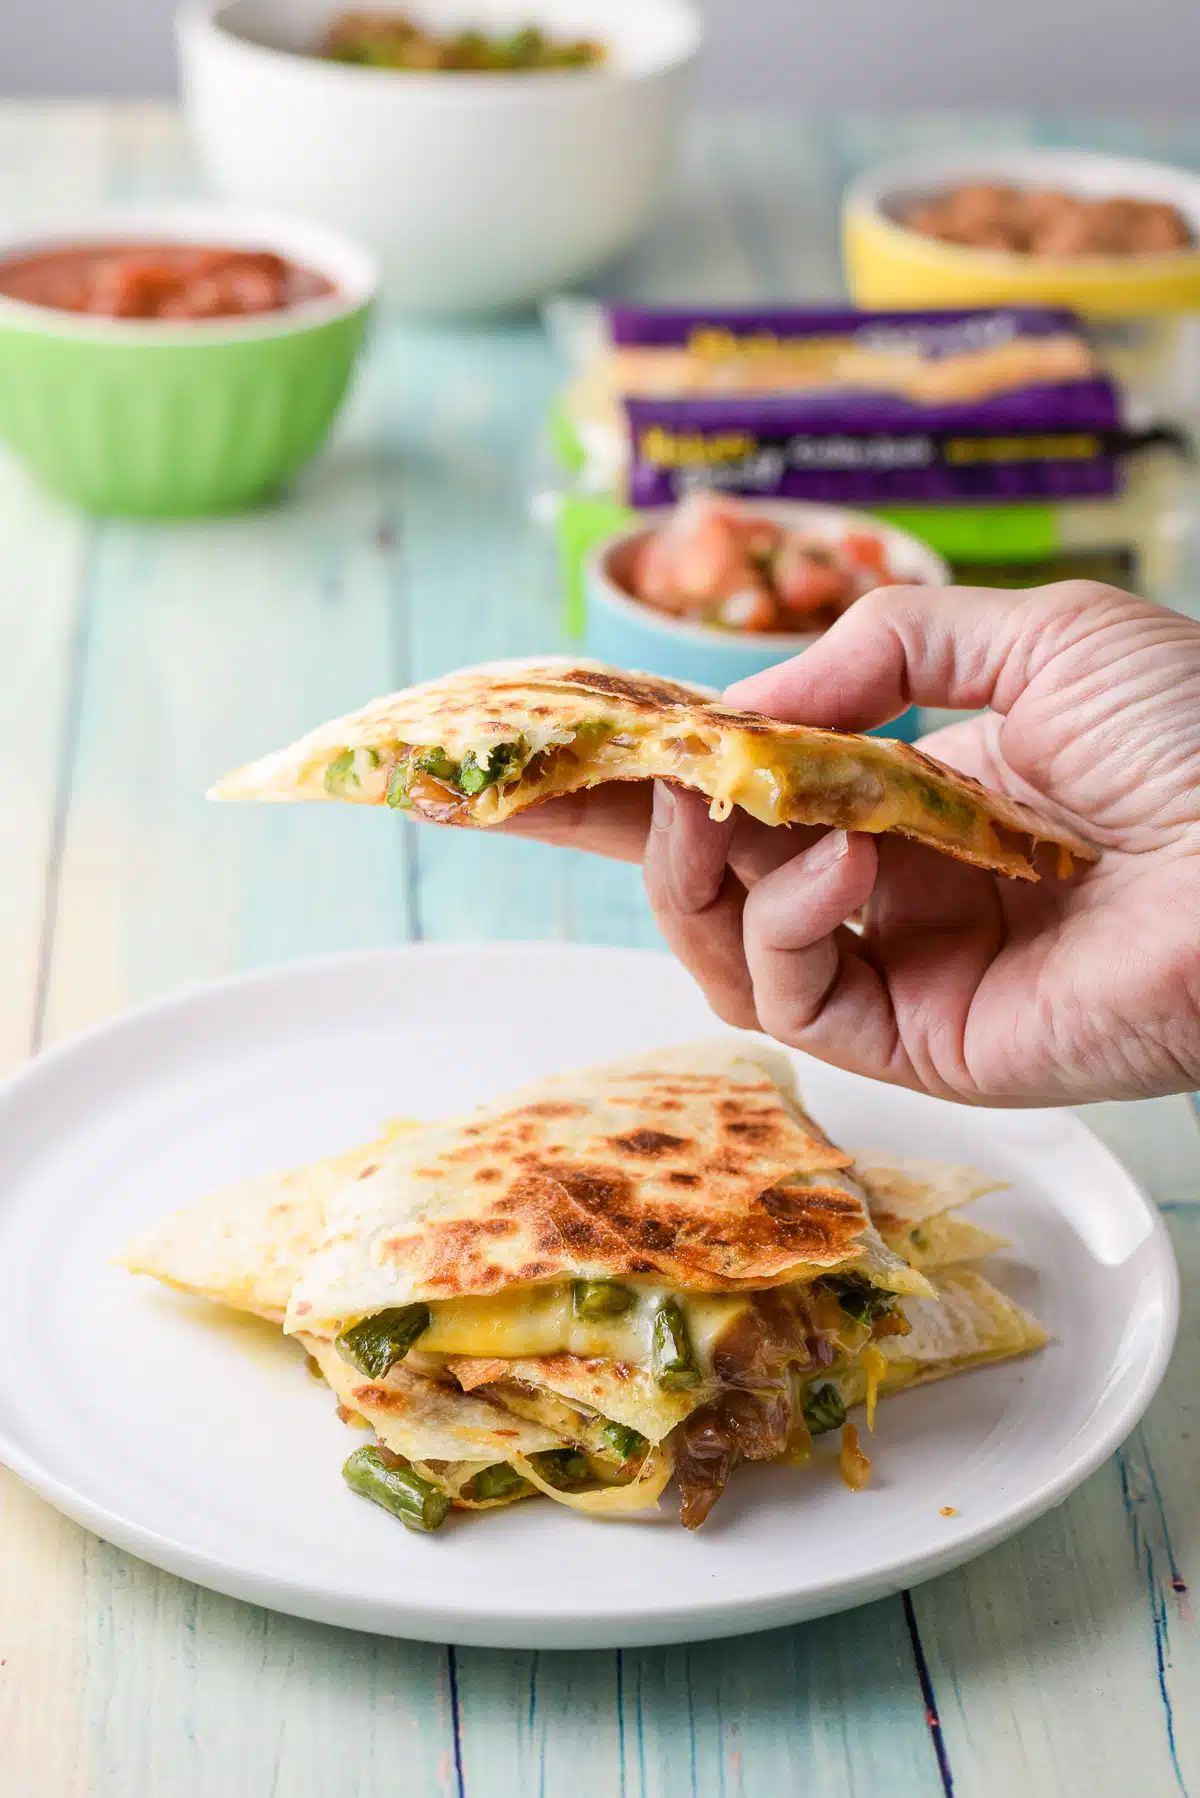 A hand holding a triangle of quesadilla with a bite taken out of it. It is over a plate of more quesadillas